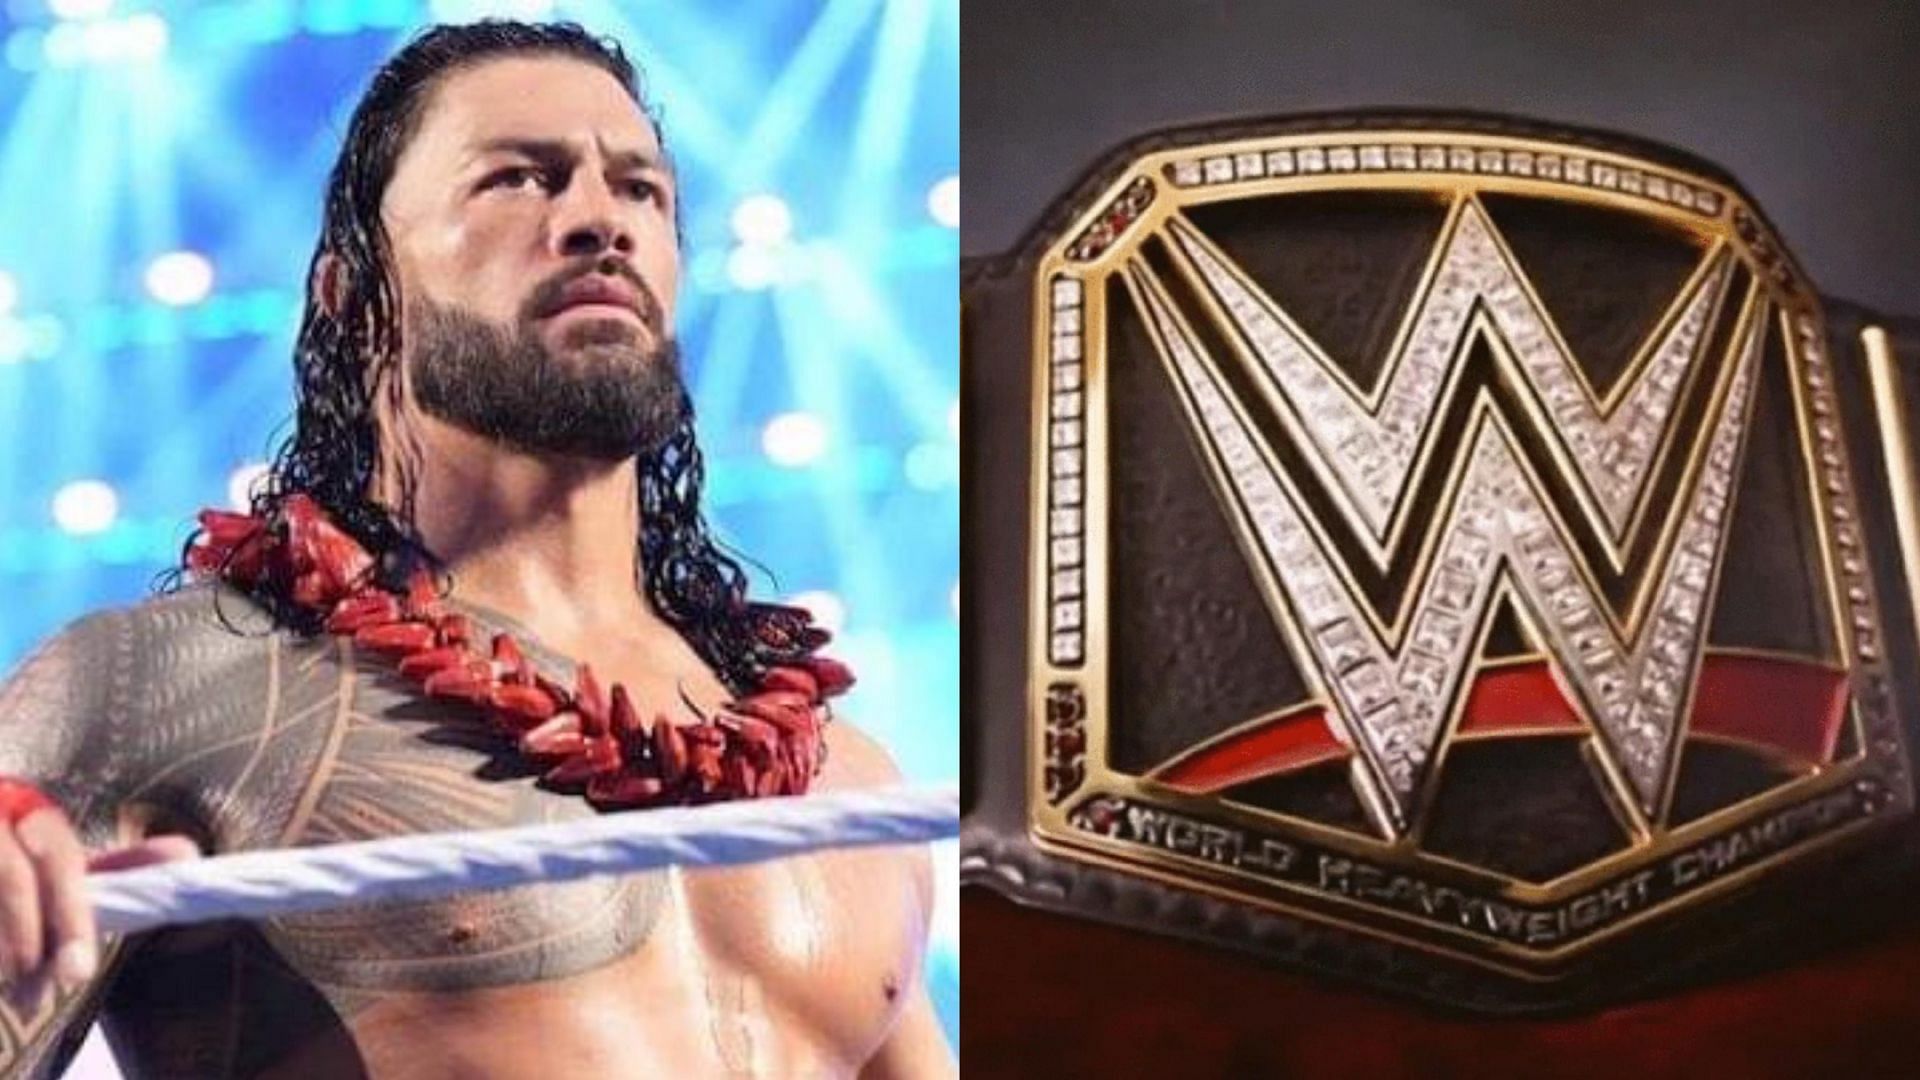 Roman Reigns recently passed 1000 days as Undisputed WWE Universal Champion.